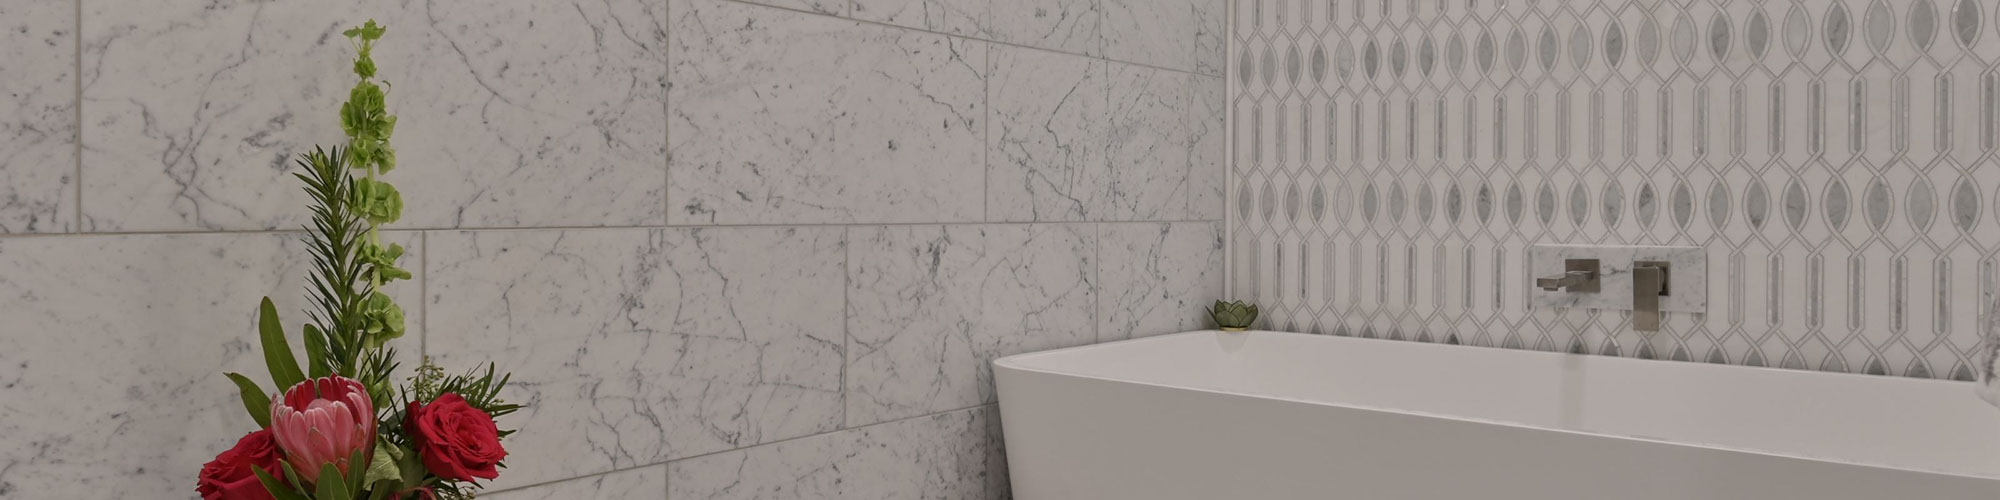 Wet room with white & gray vein marble wall tile, white & gray marble mosaic backsplash behind soaker tub, floating shelf holding bouquet of red flowers.